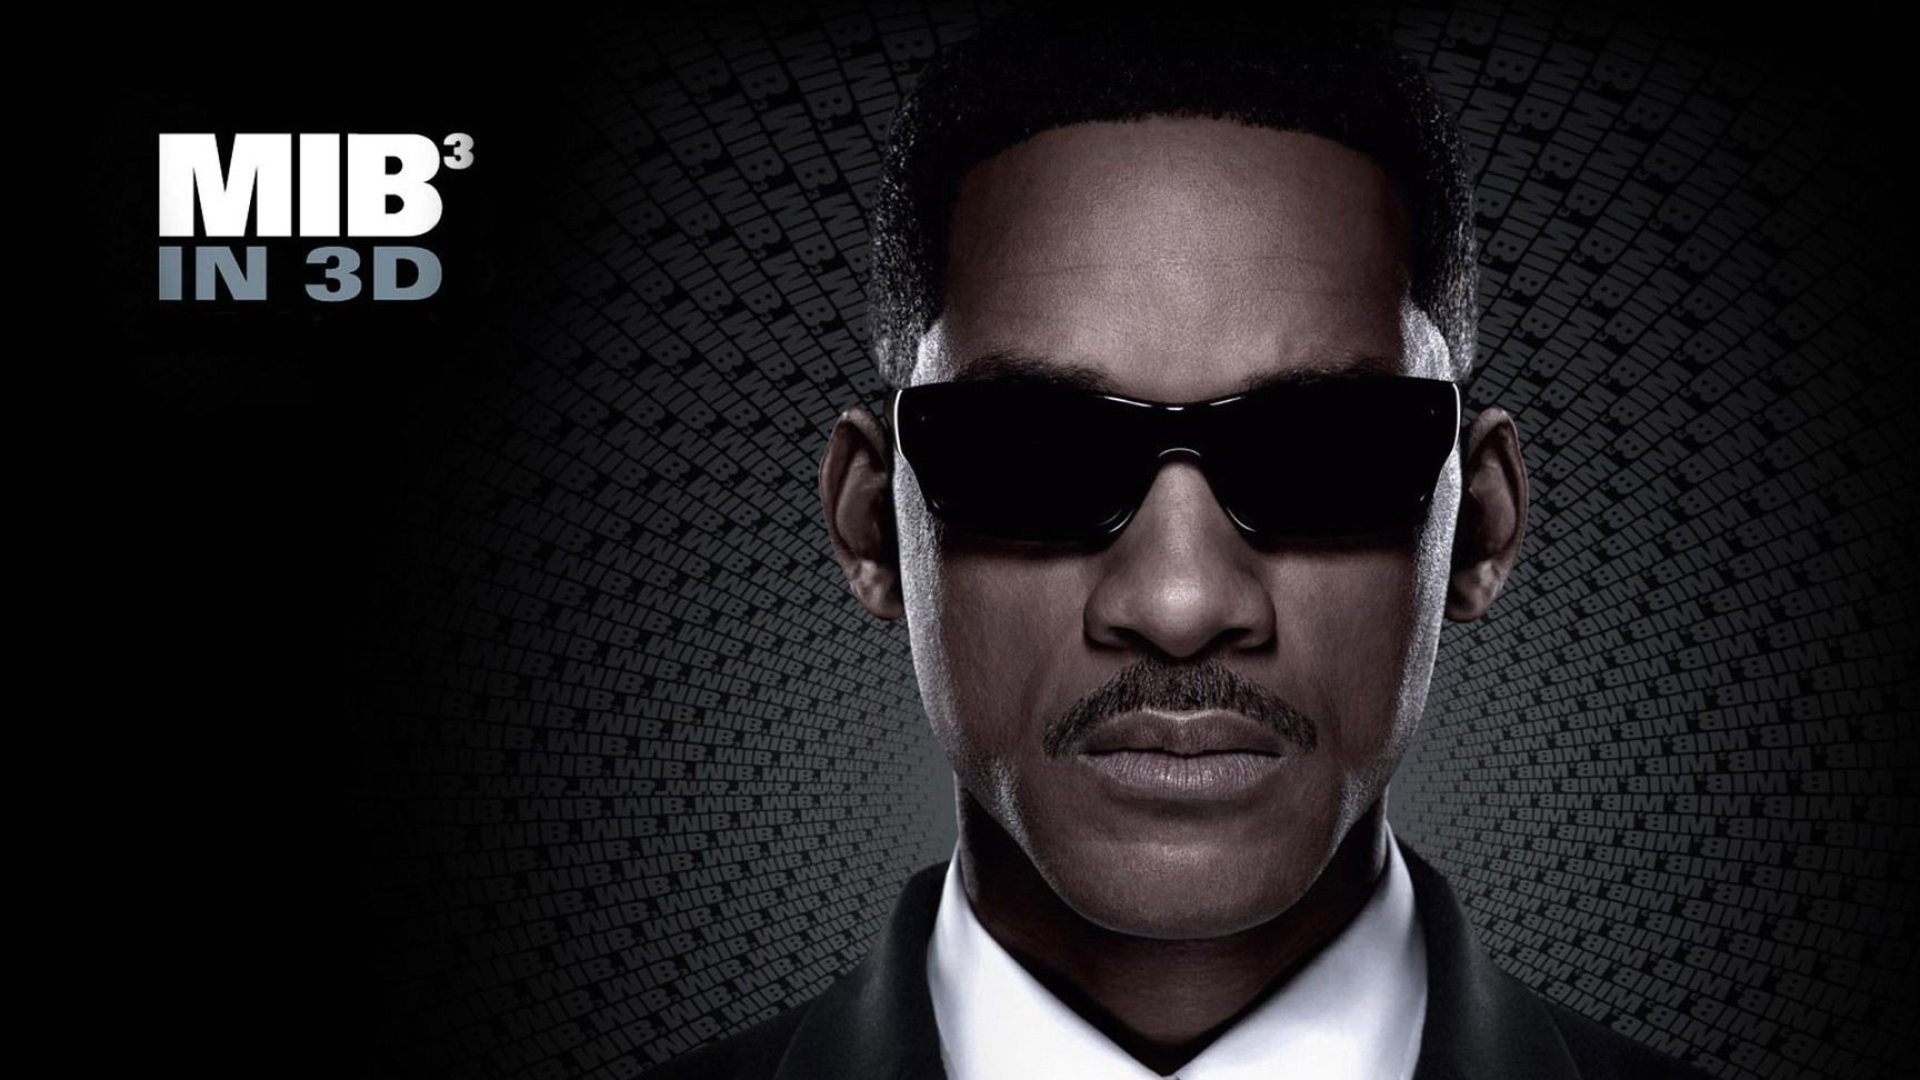 Will Smith: Men in Black 3, Agent J, An MIB agent and longtime friend and partner of K. 1920x1080 Full HD Wallpaper.